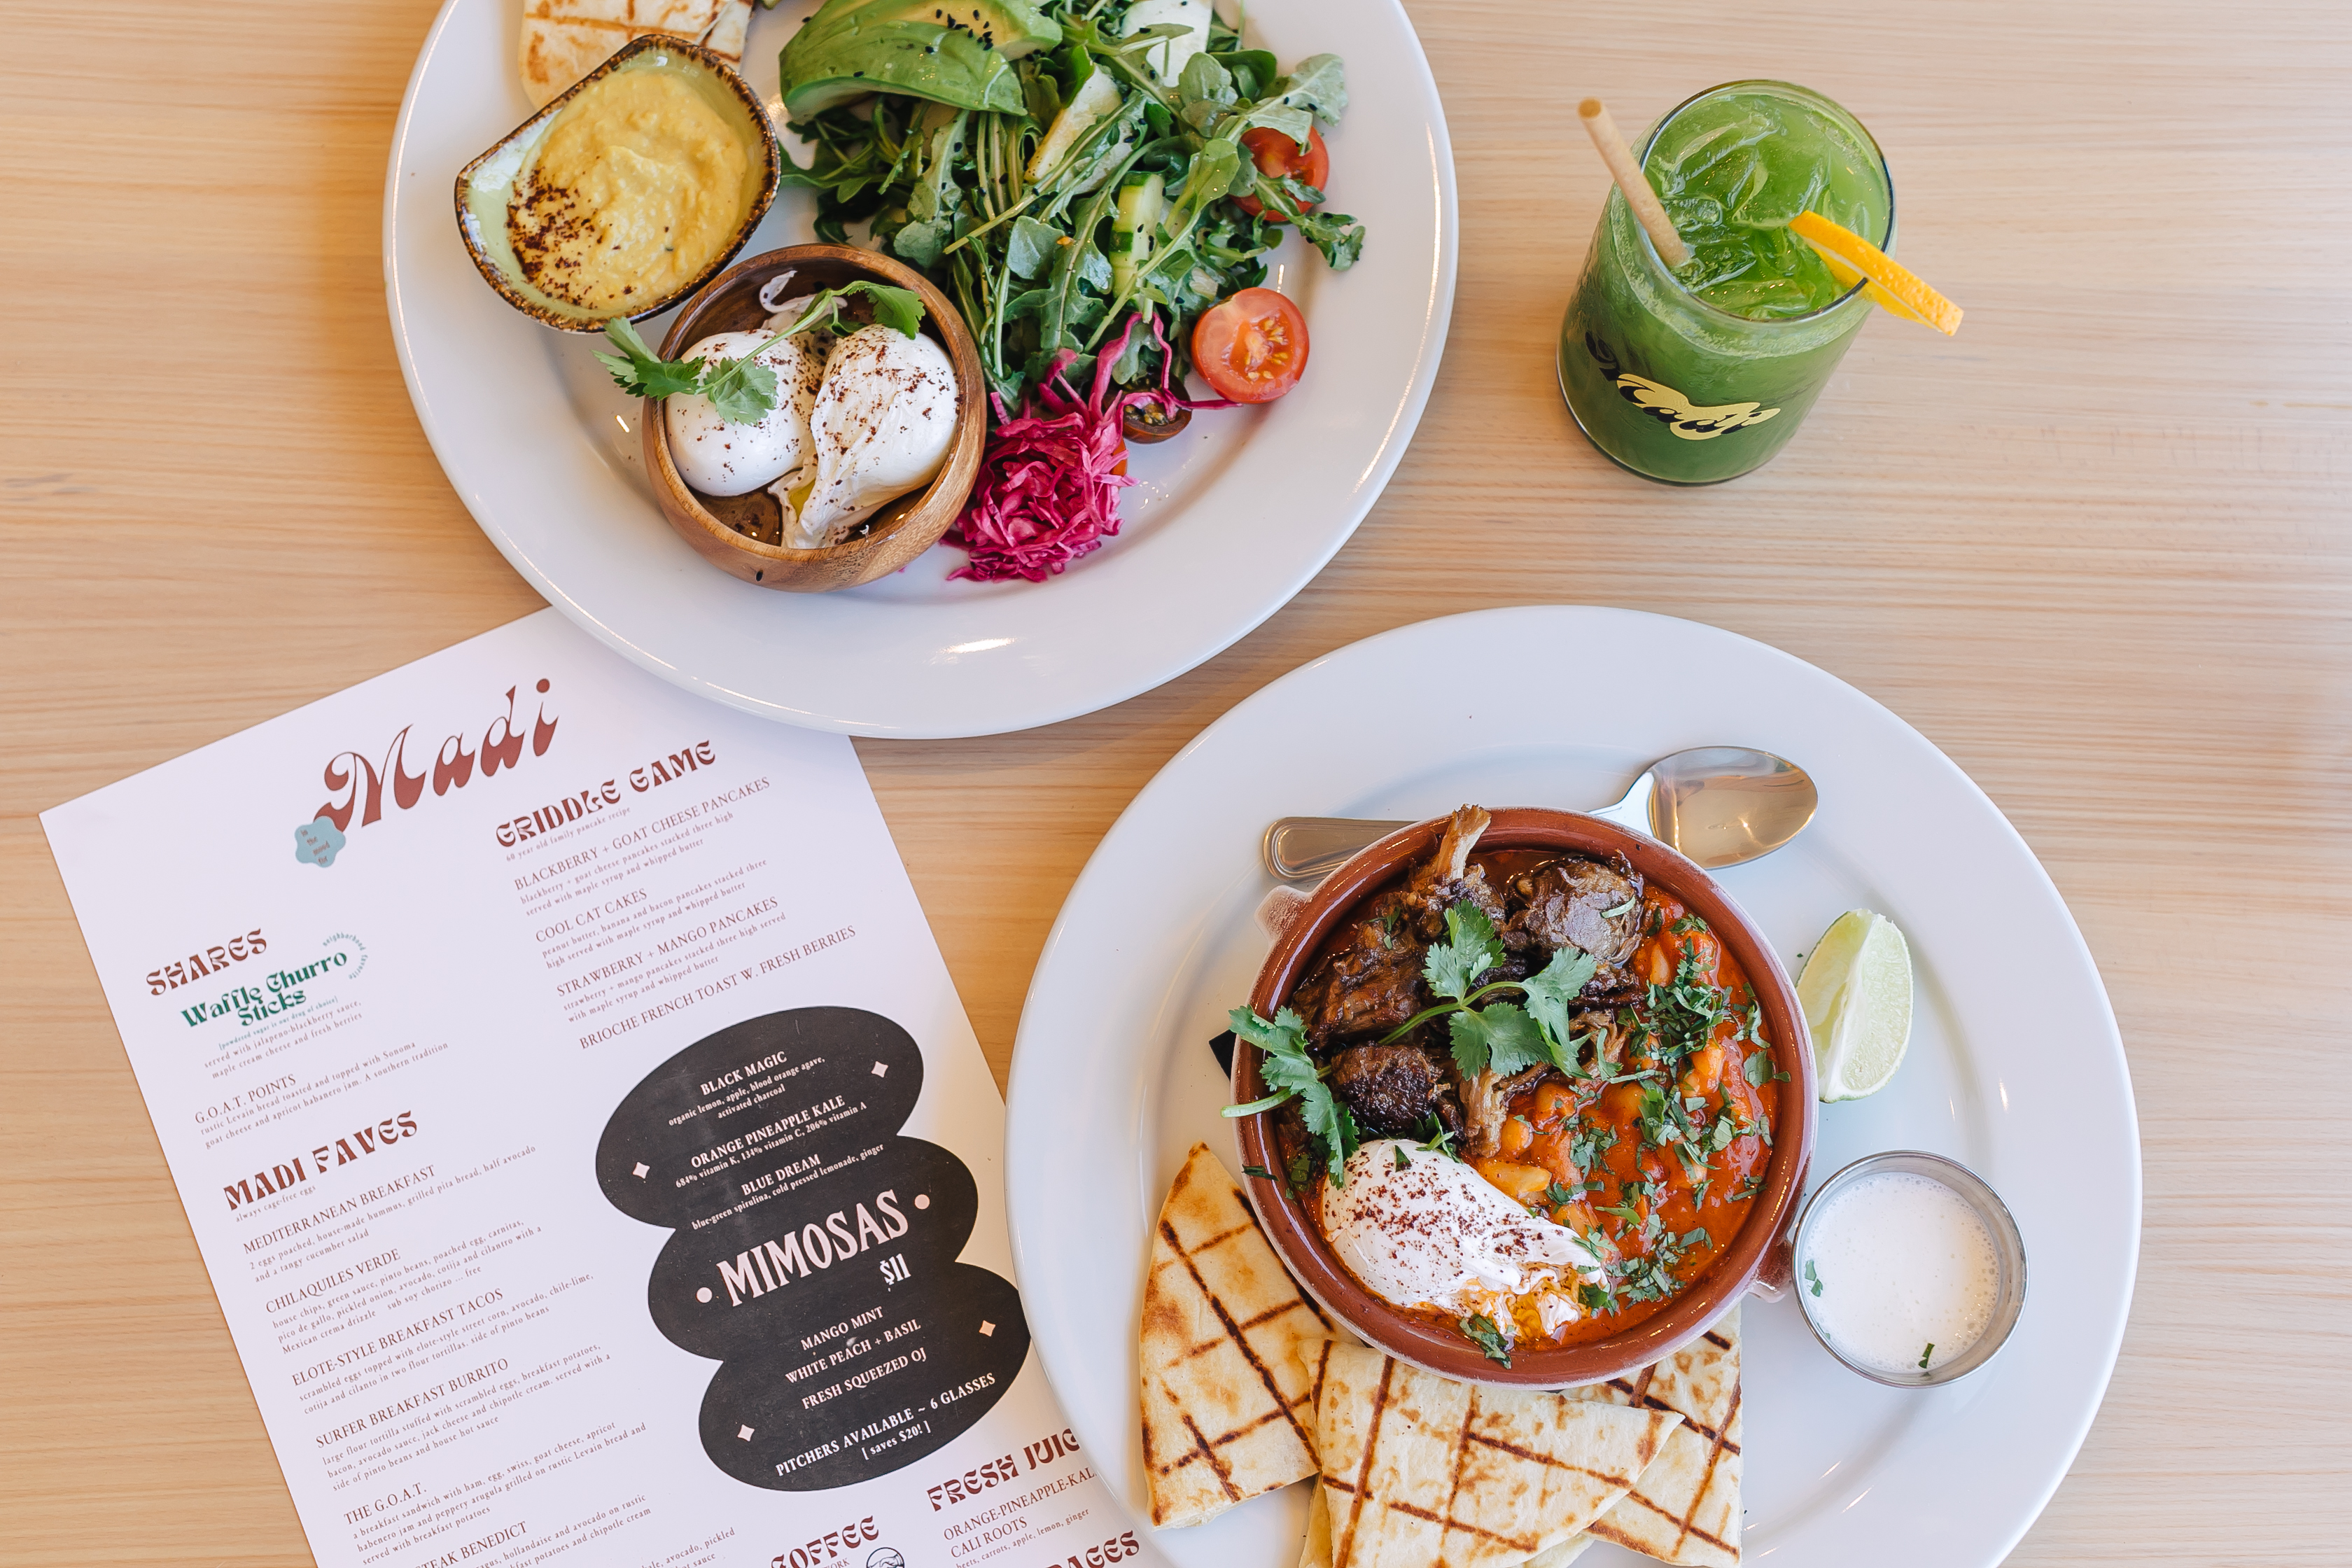 A menu on a table with two brunch-style dishes.